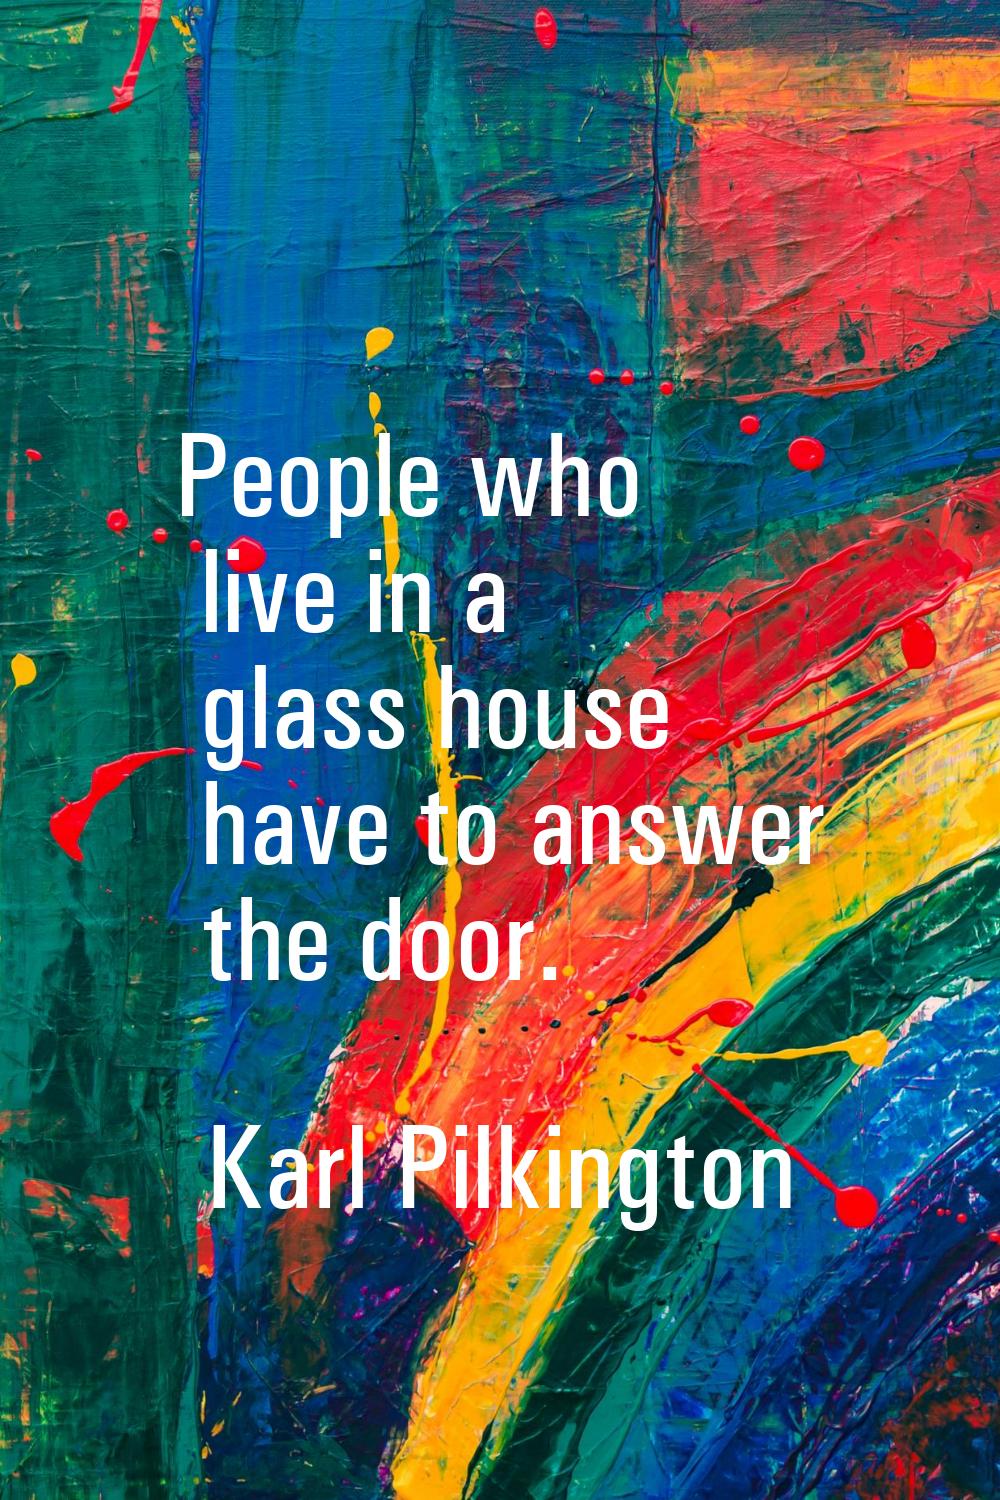 People who live in a glass house have to answer the door.